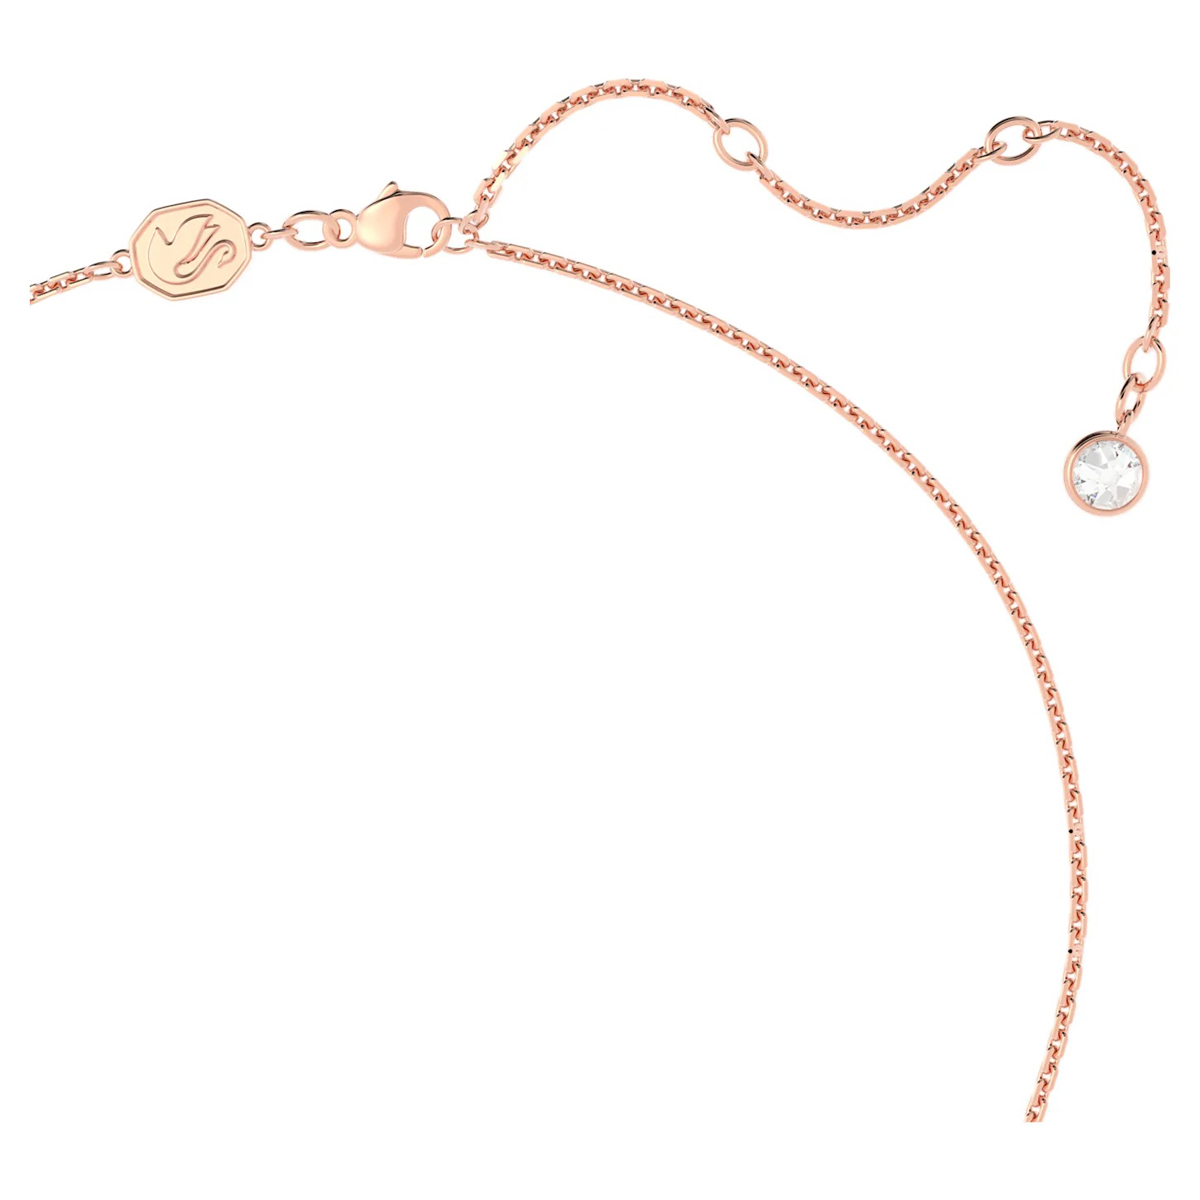 Swarovski Crystal and Rose Gold Plated Una Heart Pendant Necklace